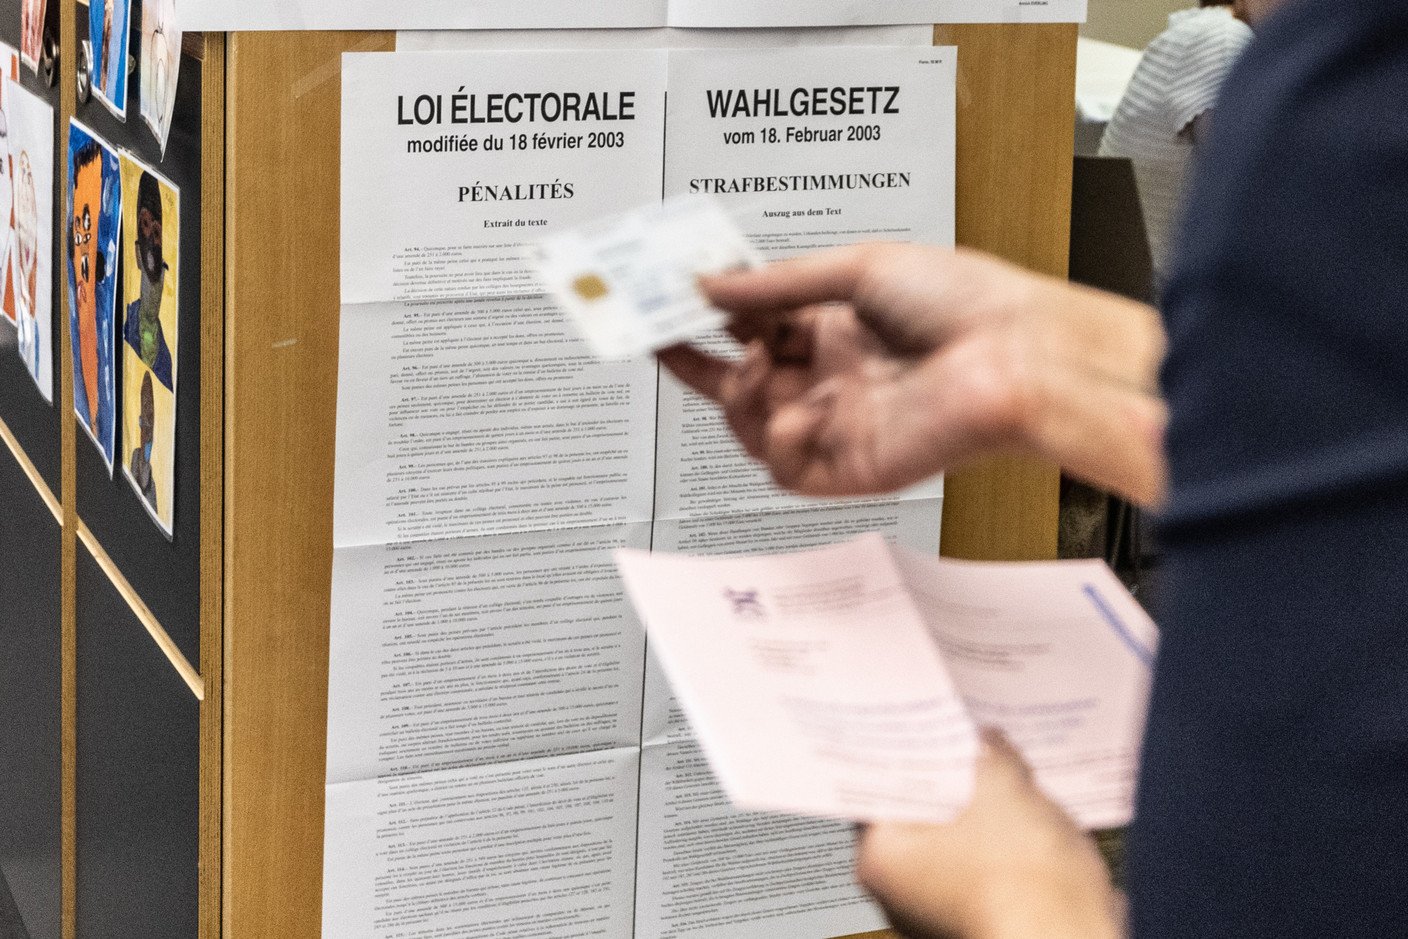 Poll workers check voters’ documents during Luxembourg’s local elections, in Esch-sur-Alzette, 11 June 2023. Photo: Guy Wolff/Maison Moderne